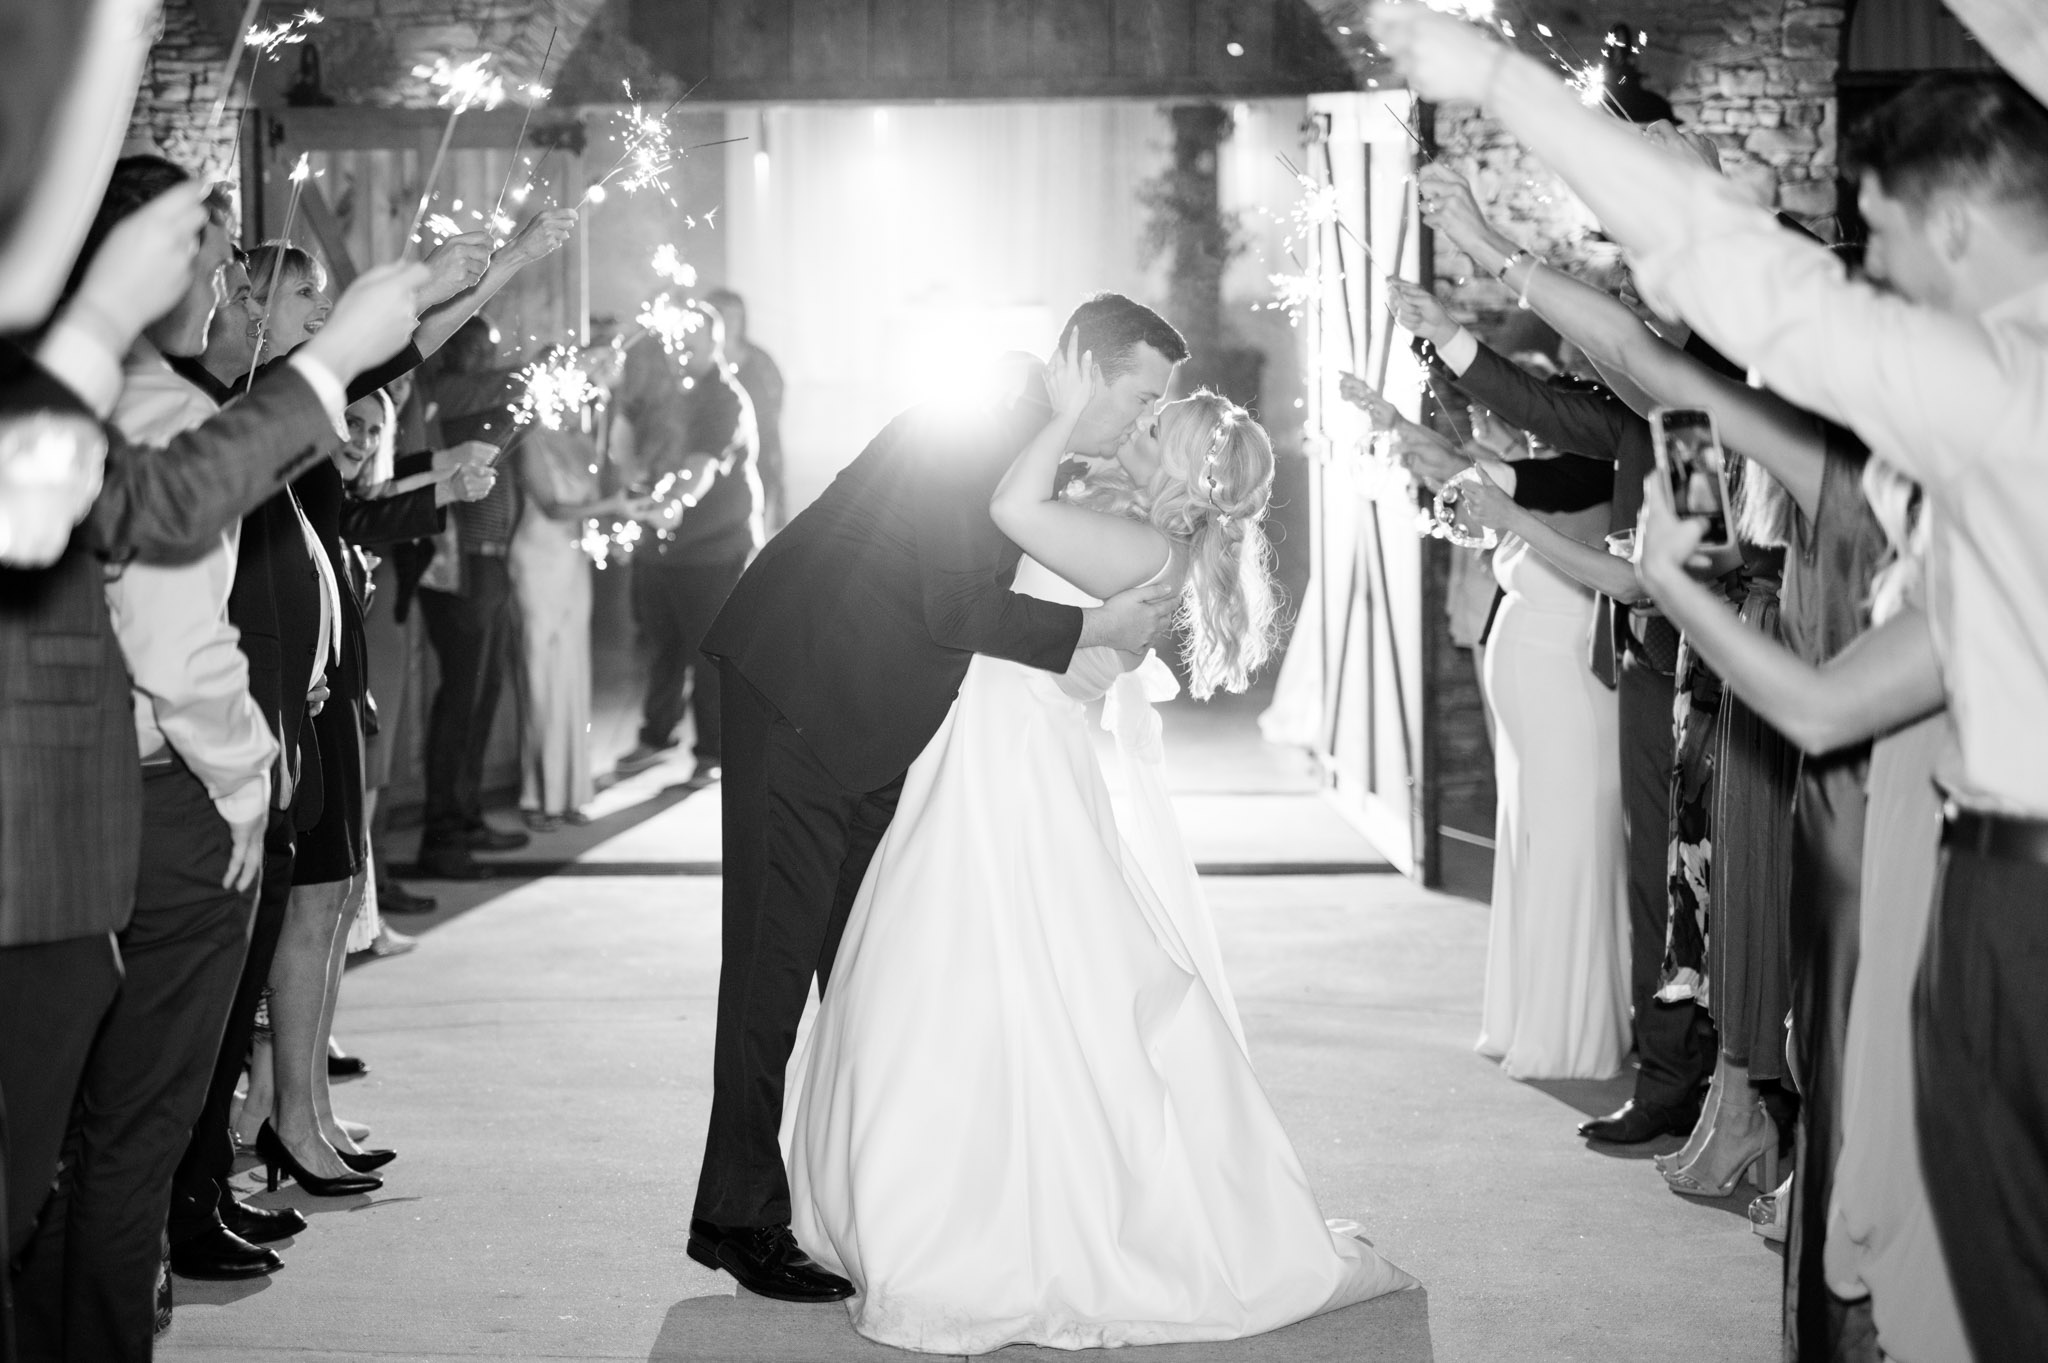 Bride and groom kiss under sparklers.